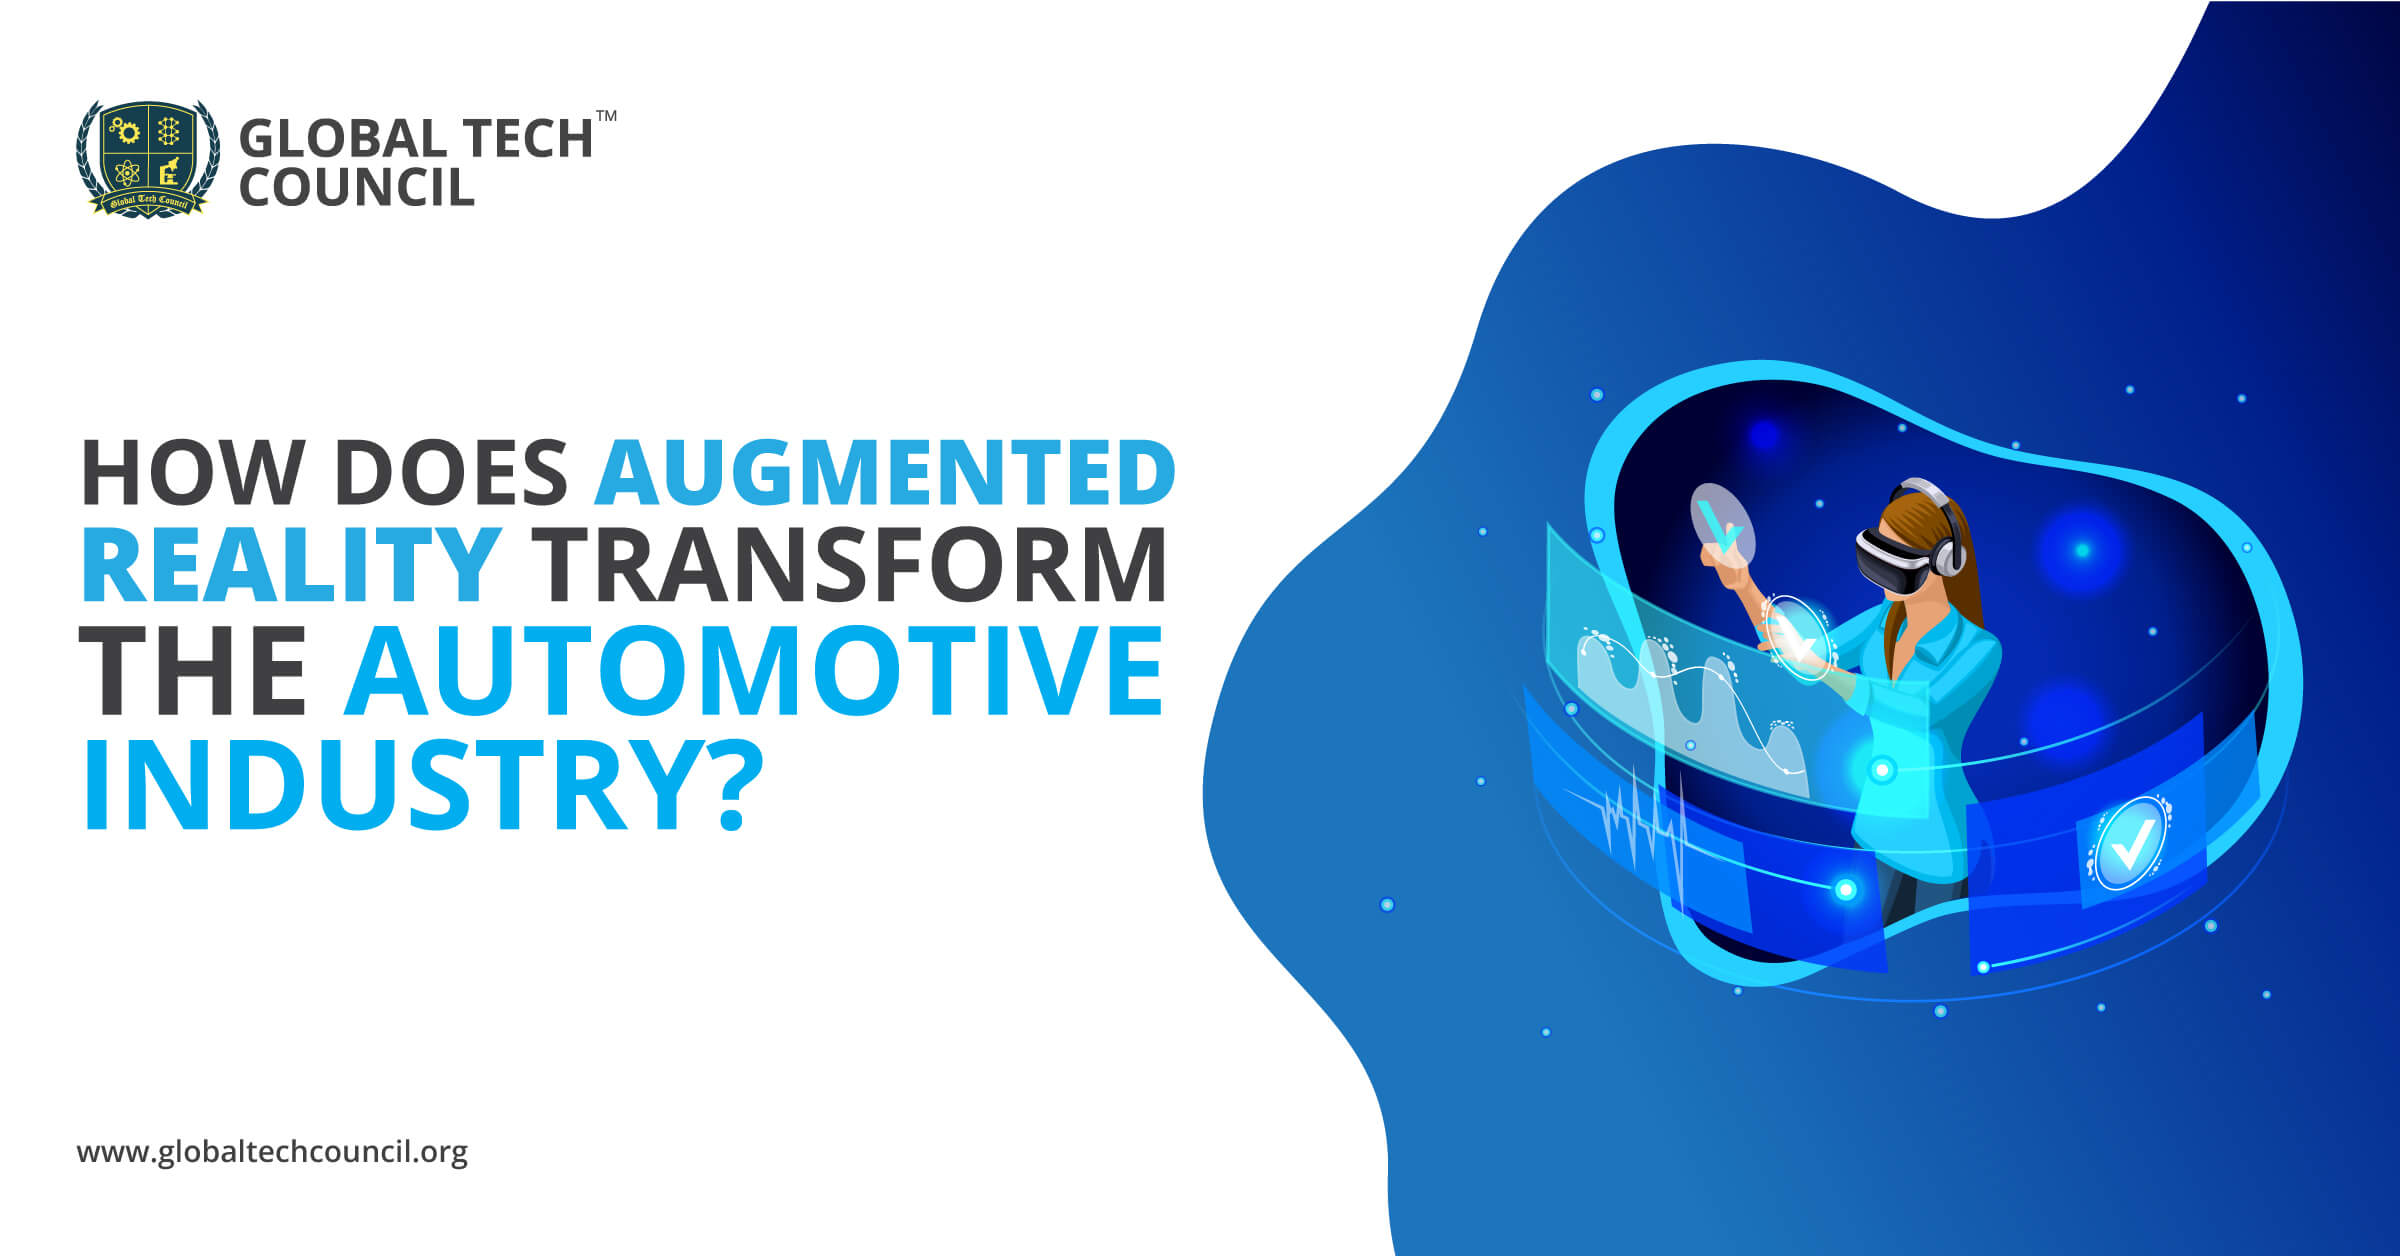 How Does Augmented Reality Transform the Automotive Industry